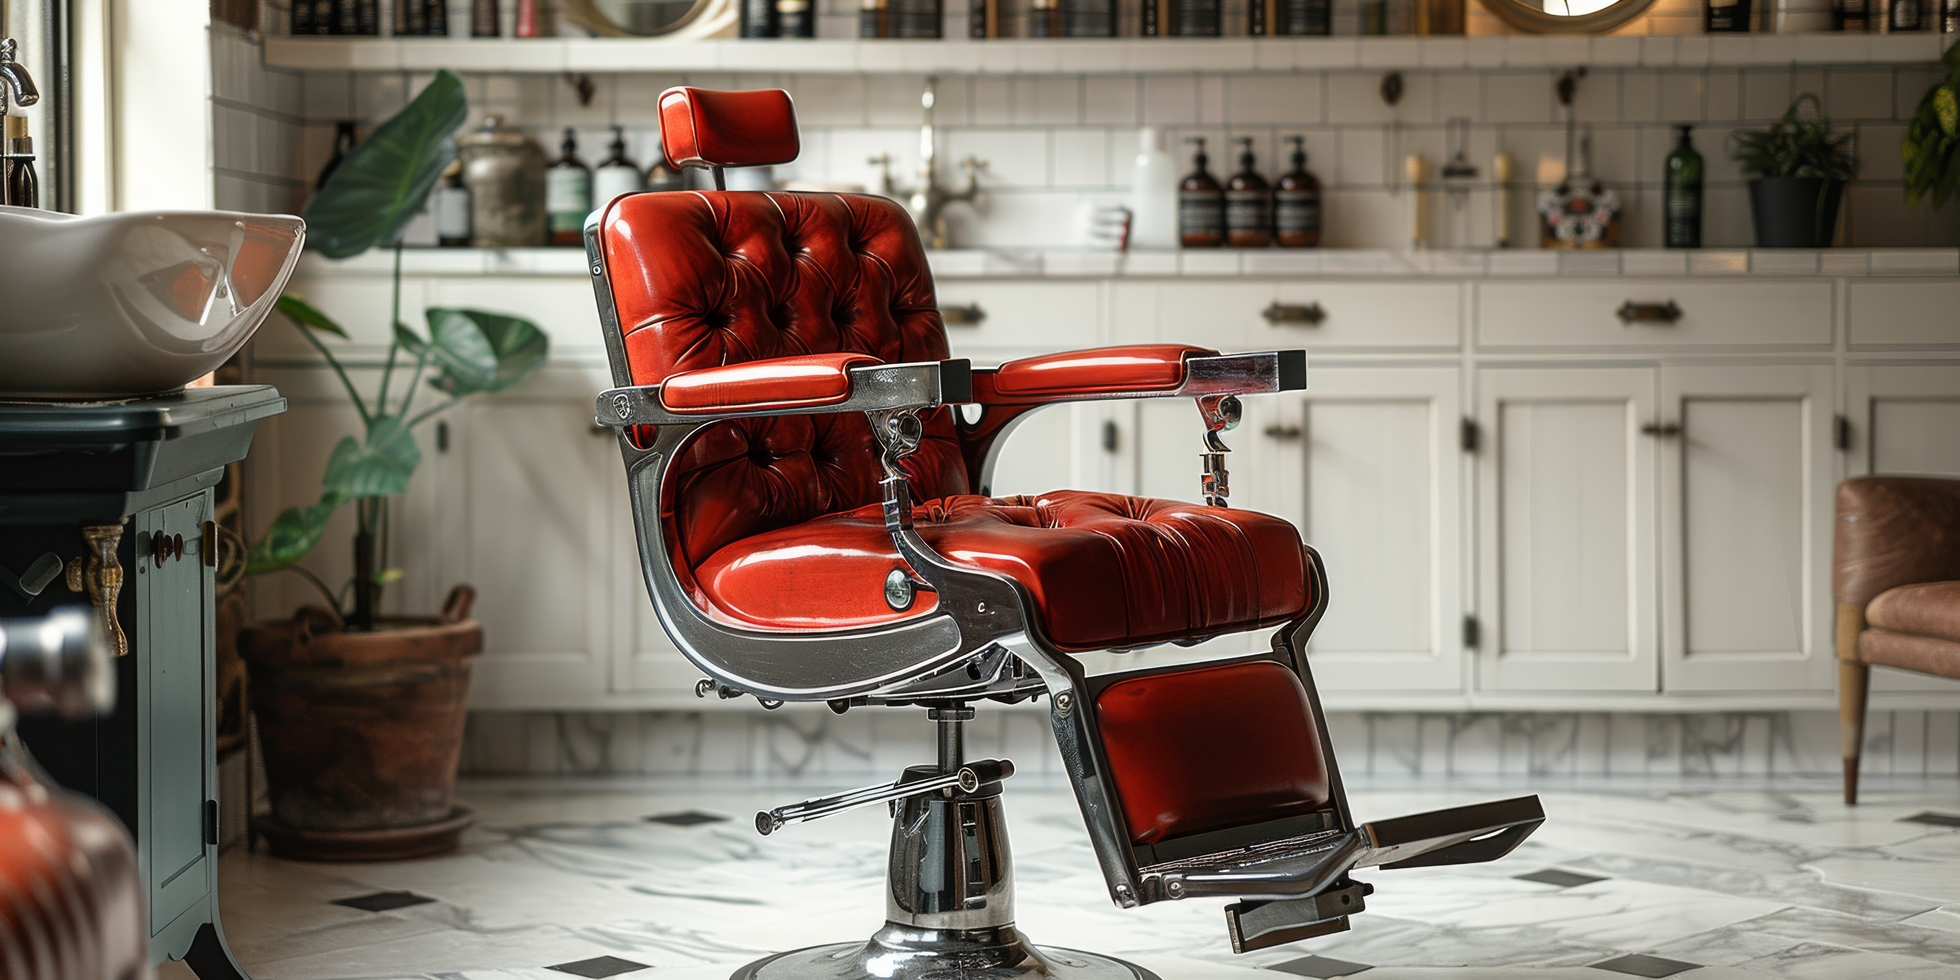 What is a barber chair?